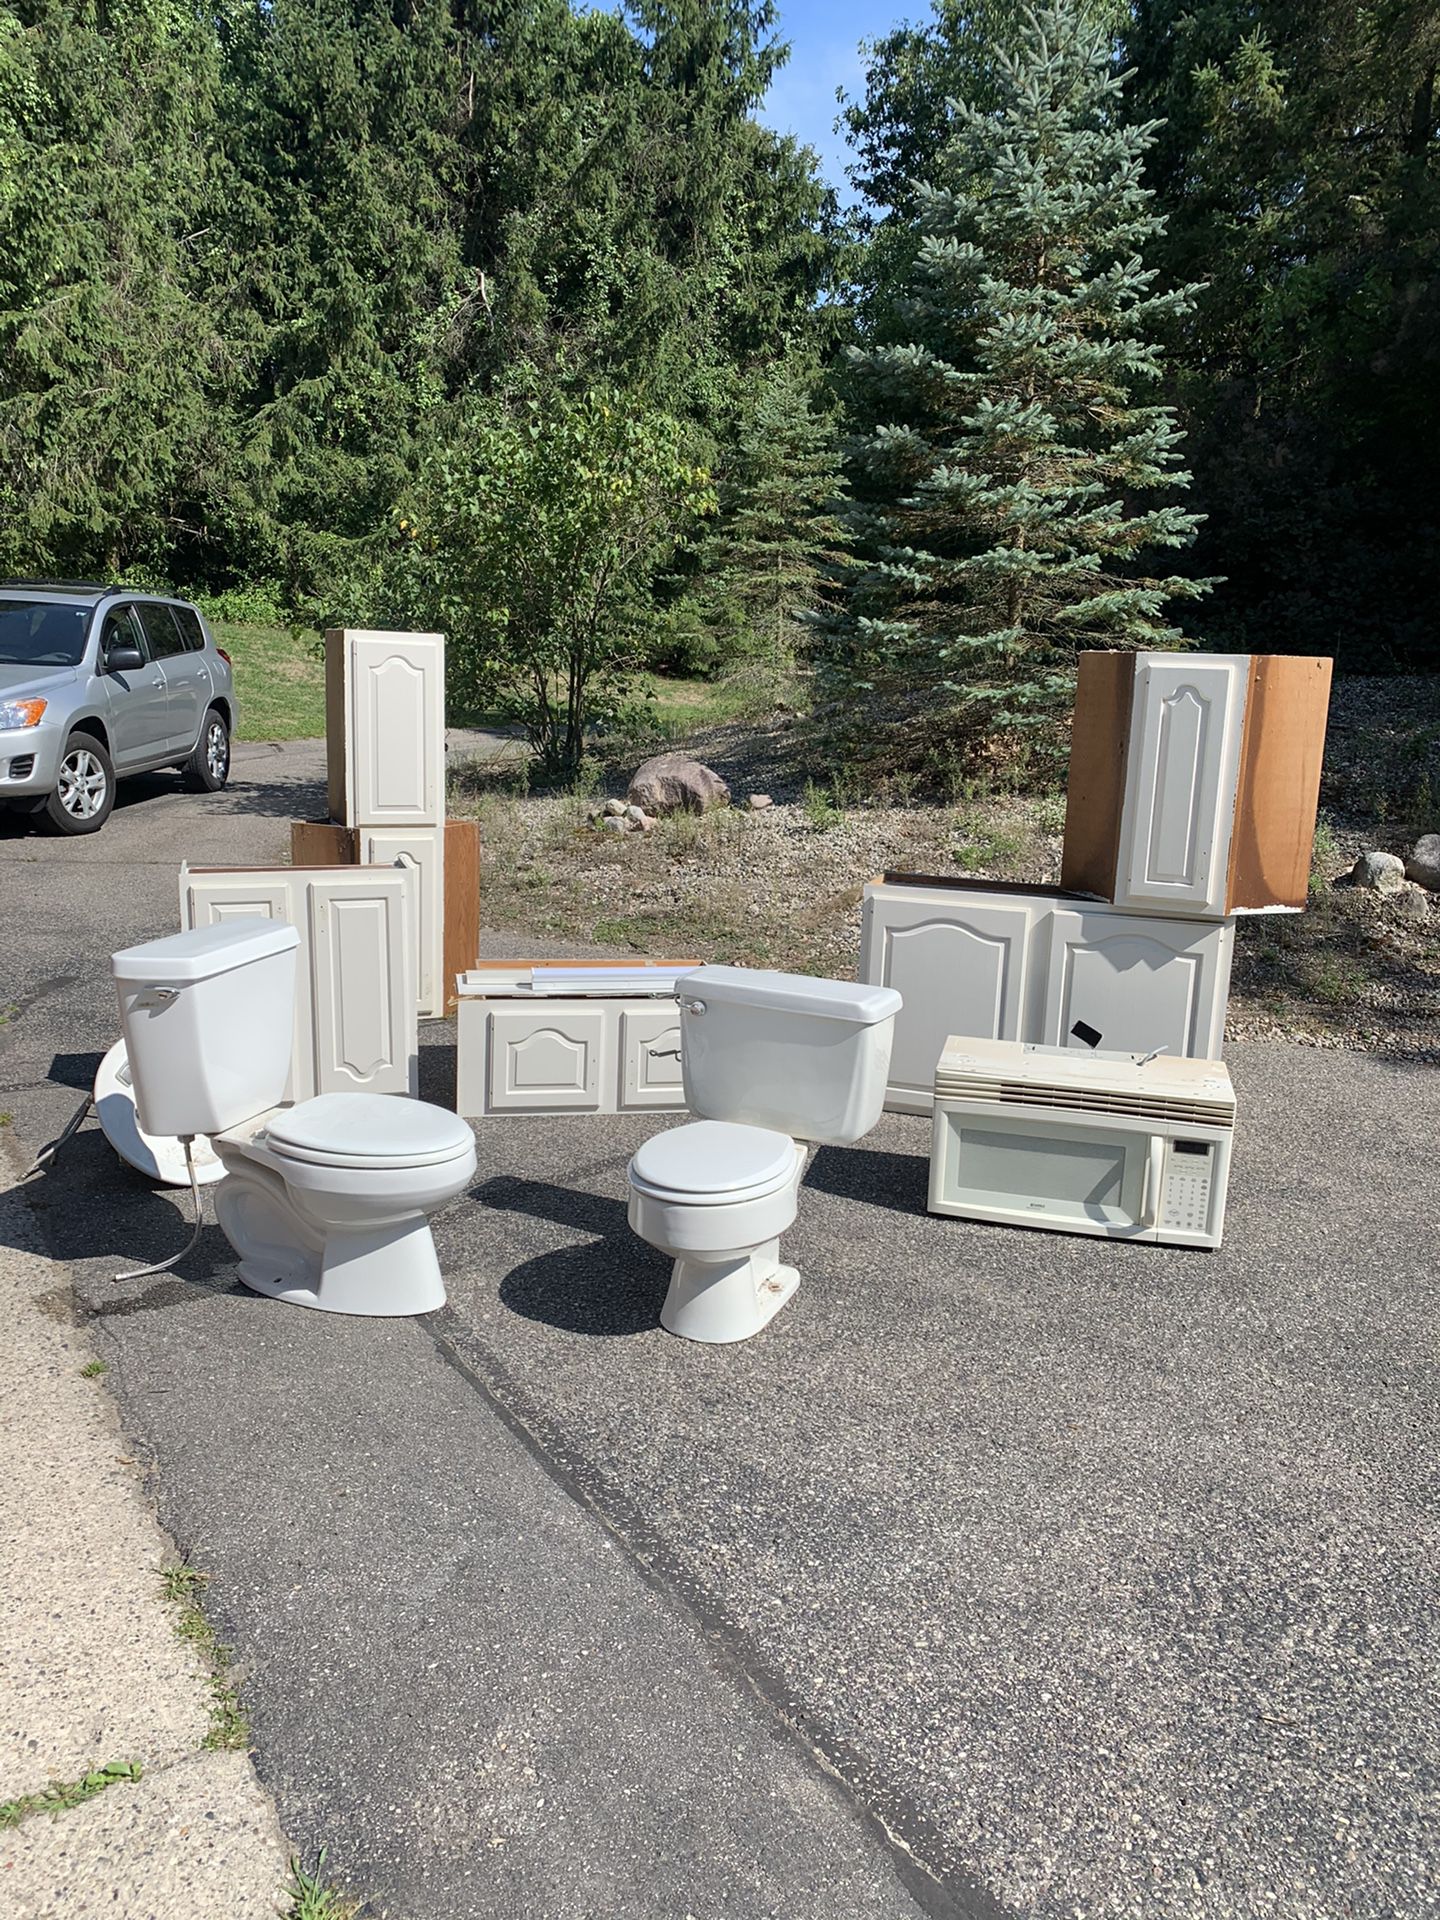 Free Cabinets, Sinks, More!